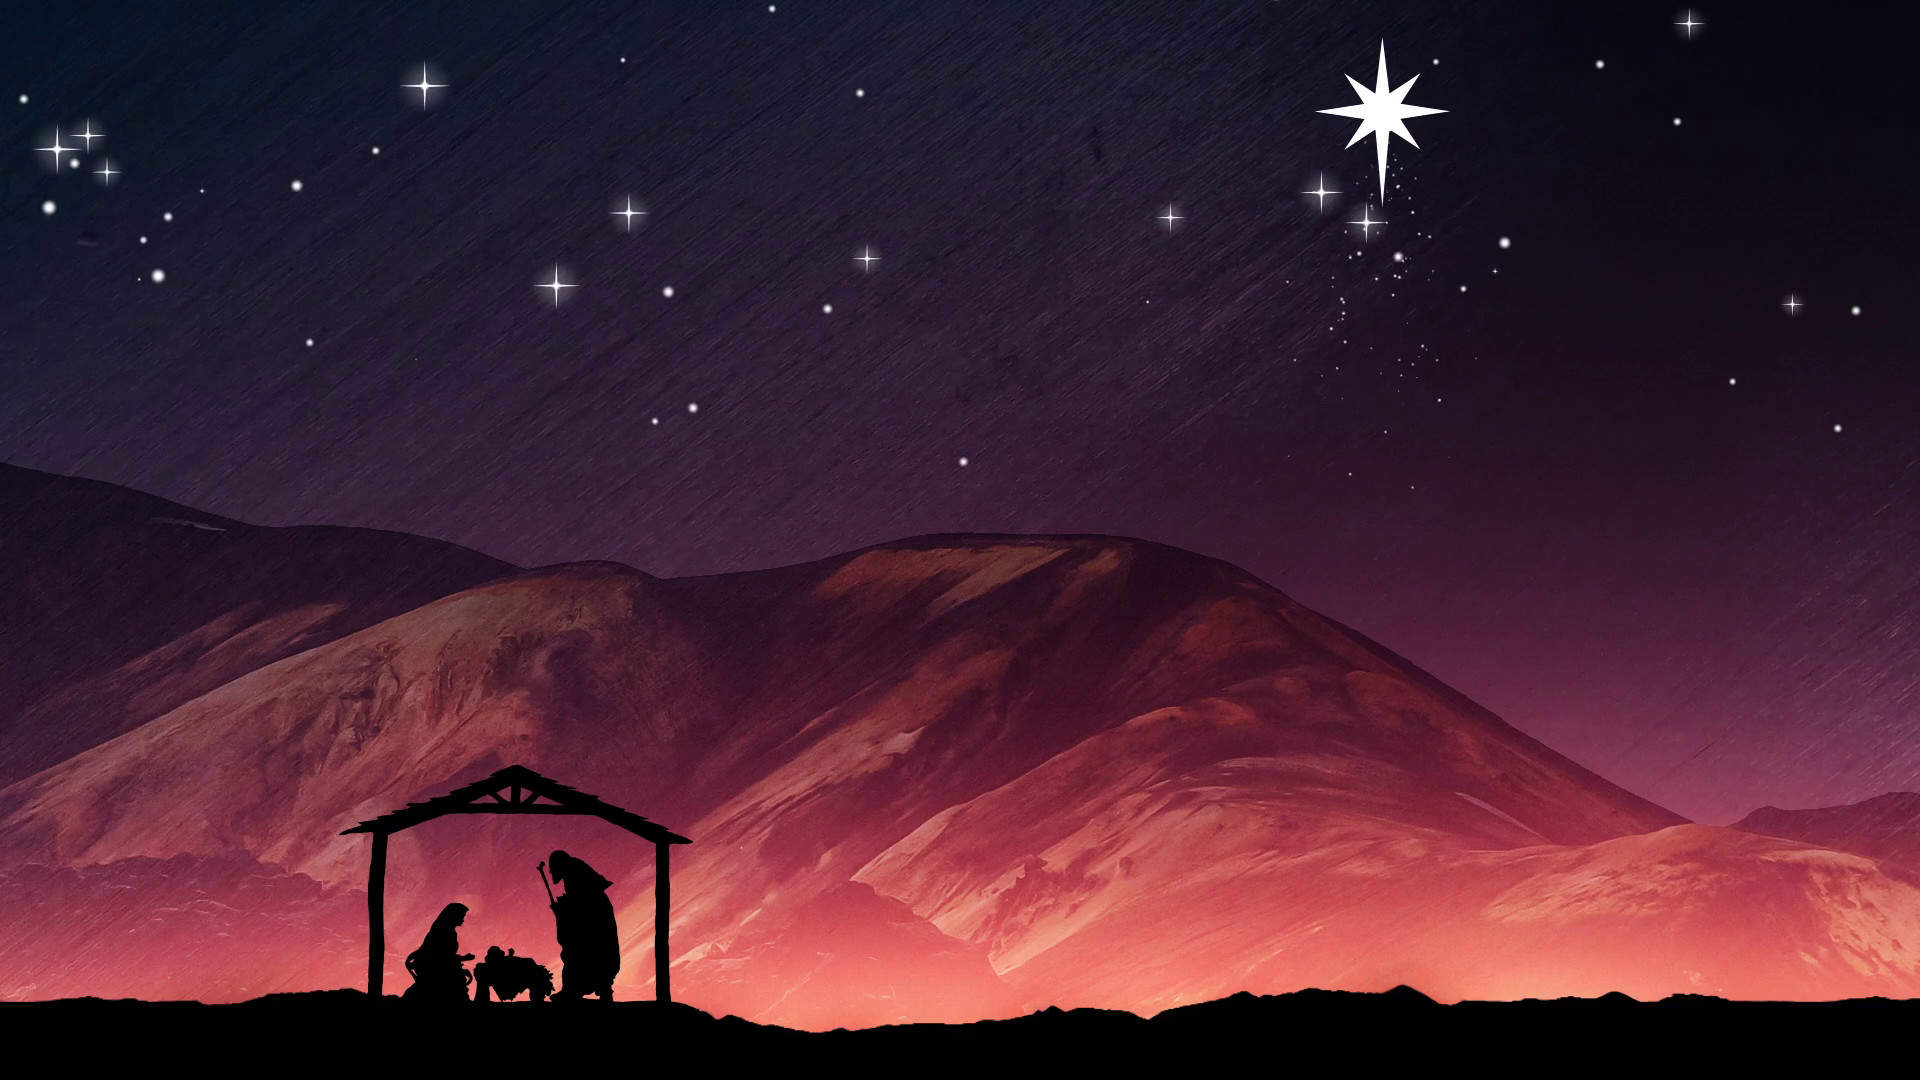 Christmas Nativity Backgrounds 52 Images HD Wallpapers Download Free Images Wallpaper [wallpaper981.blogspot.com]